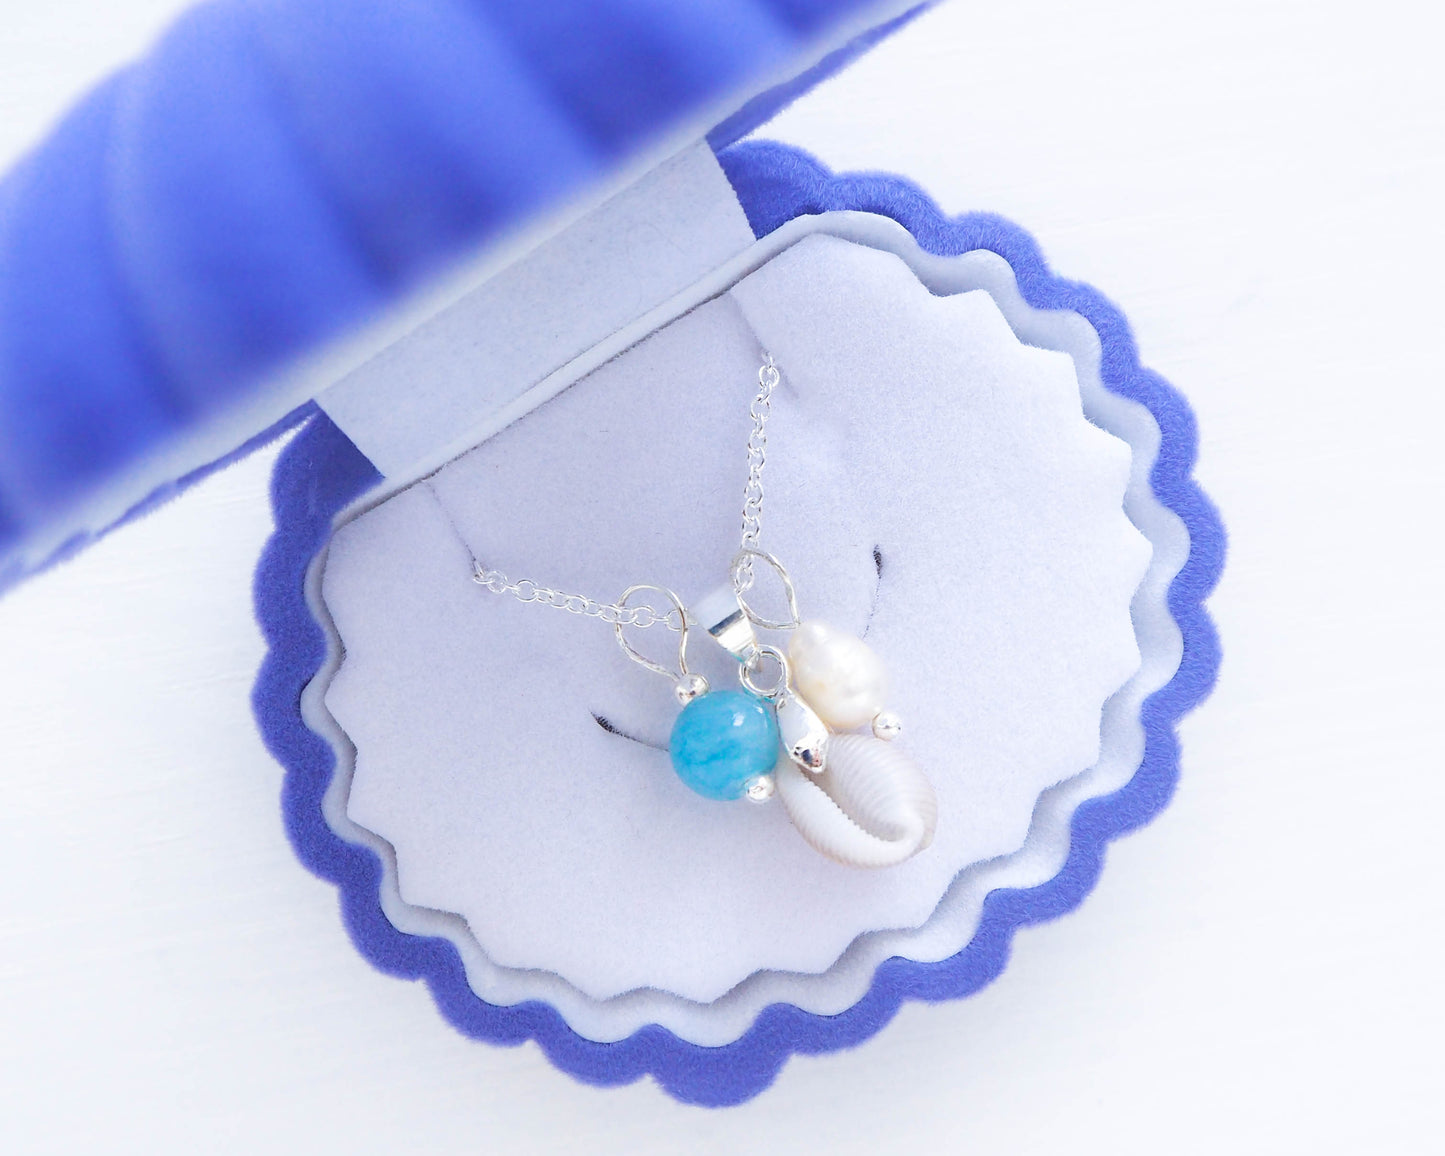 Ocean-Inspired Necklace Trio, easide Harmony Trio Necklace featuring Portuguese cowrie shell, aquamarine bead, and white freshwater pearl pendants on a 925 silver chain